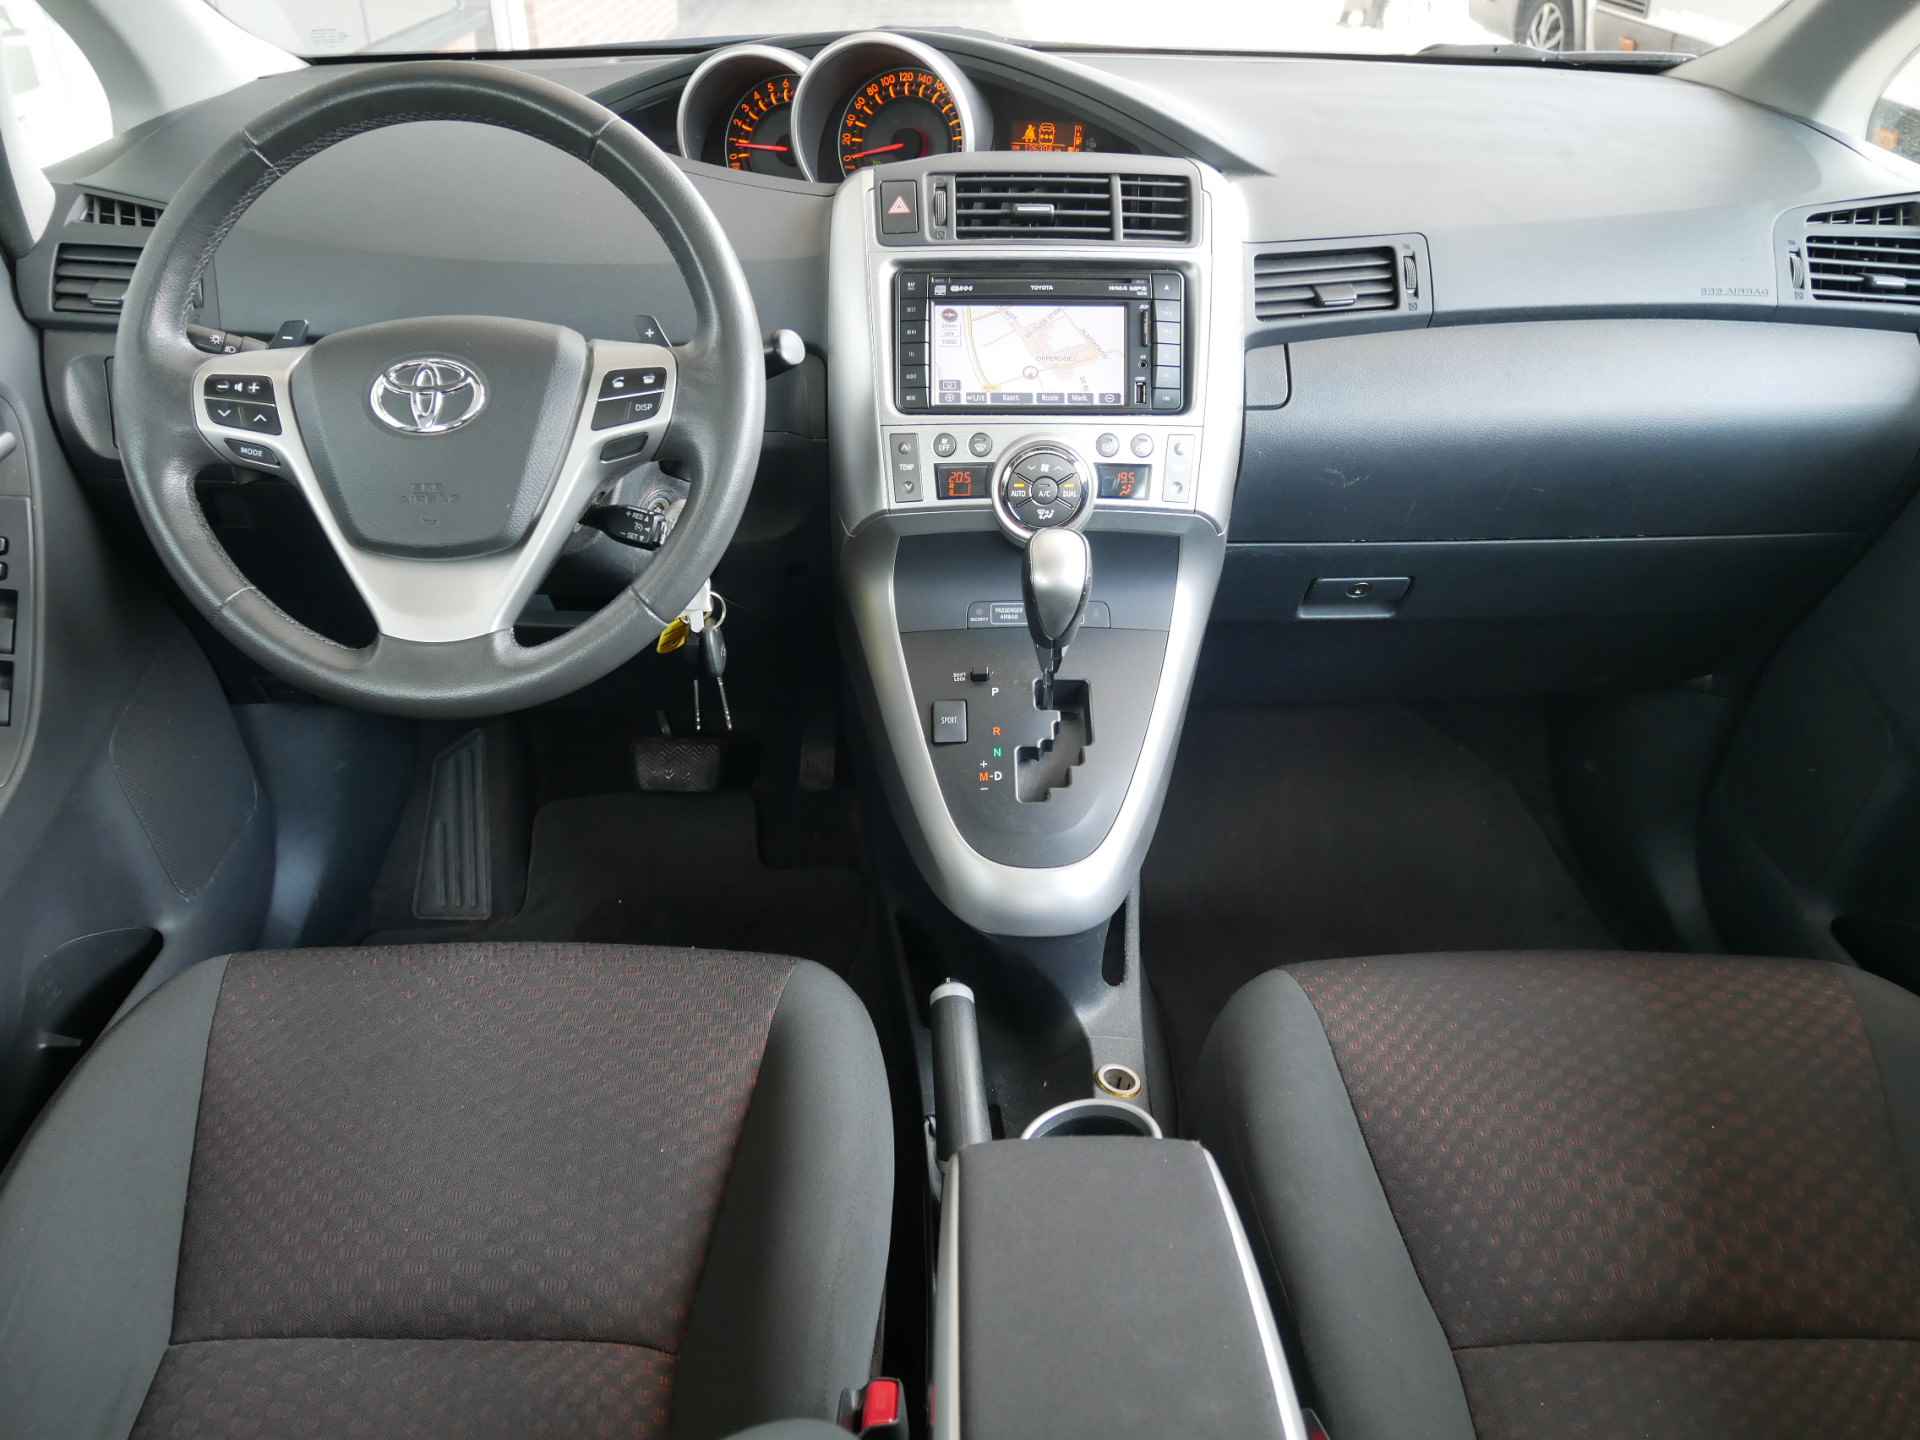 Toyota Verso 1.8 VVT-i Business Limited, Automaat, Zeer goede staat!!! - 5/26